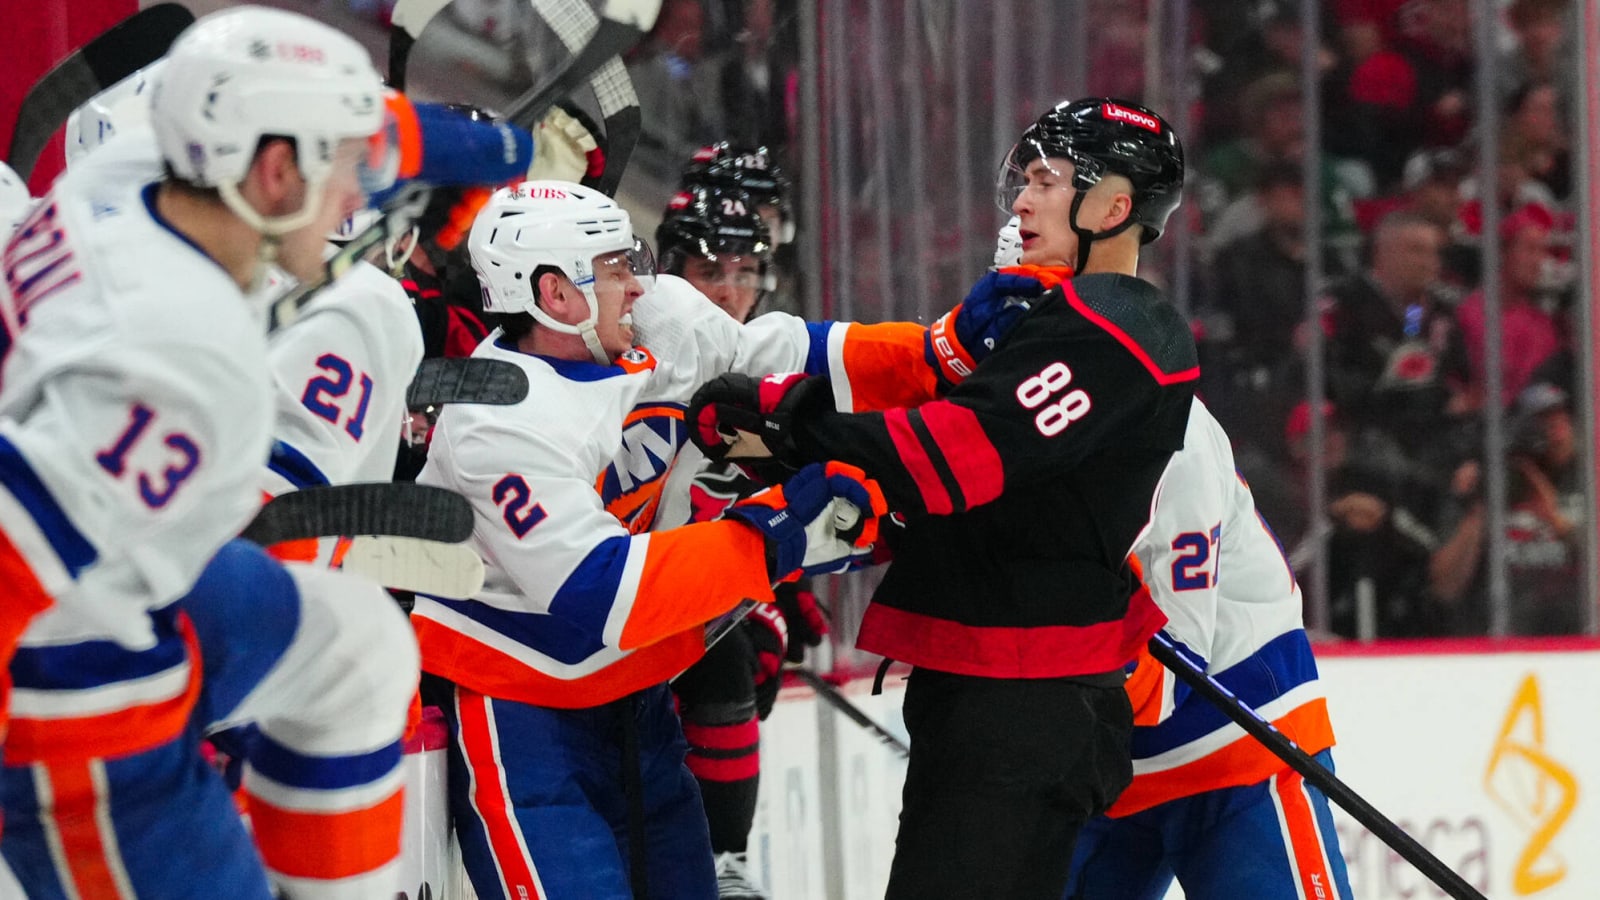 Islanders Have Blueprint to Win Series After Game 1 Loss